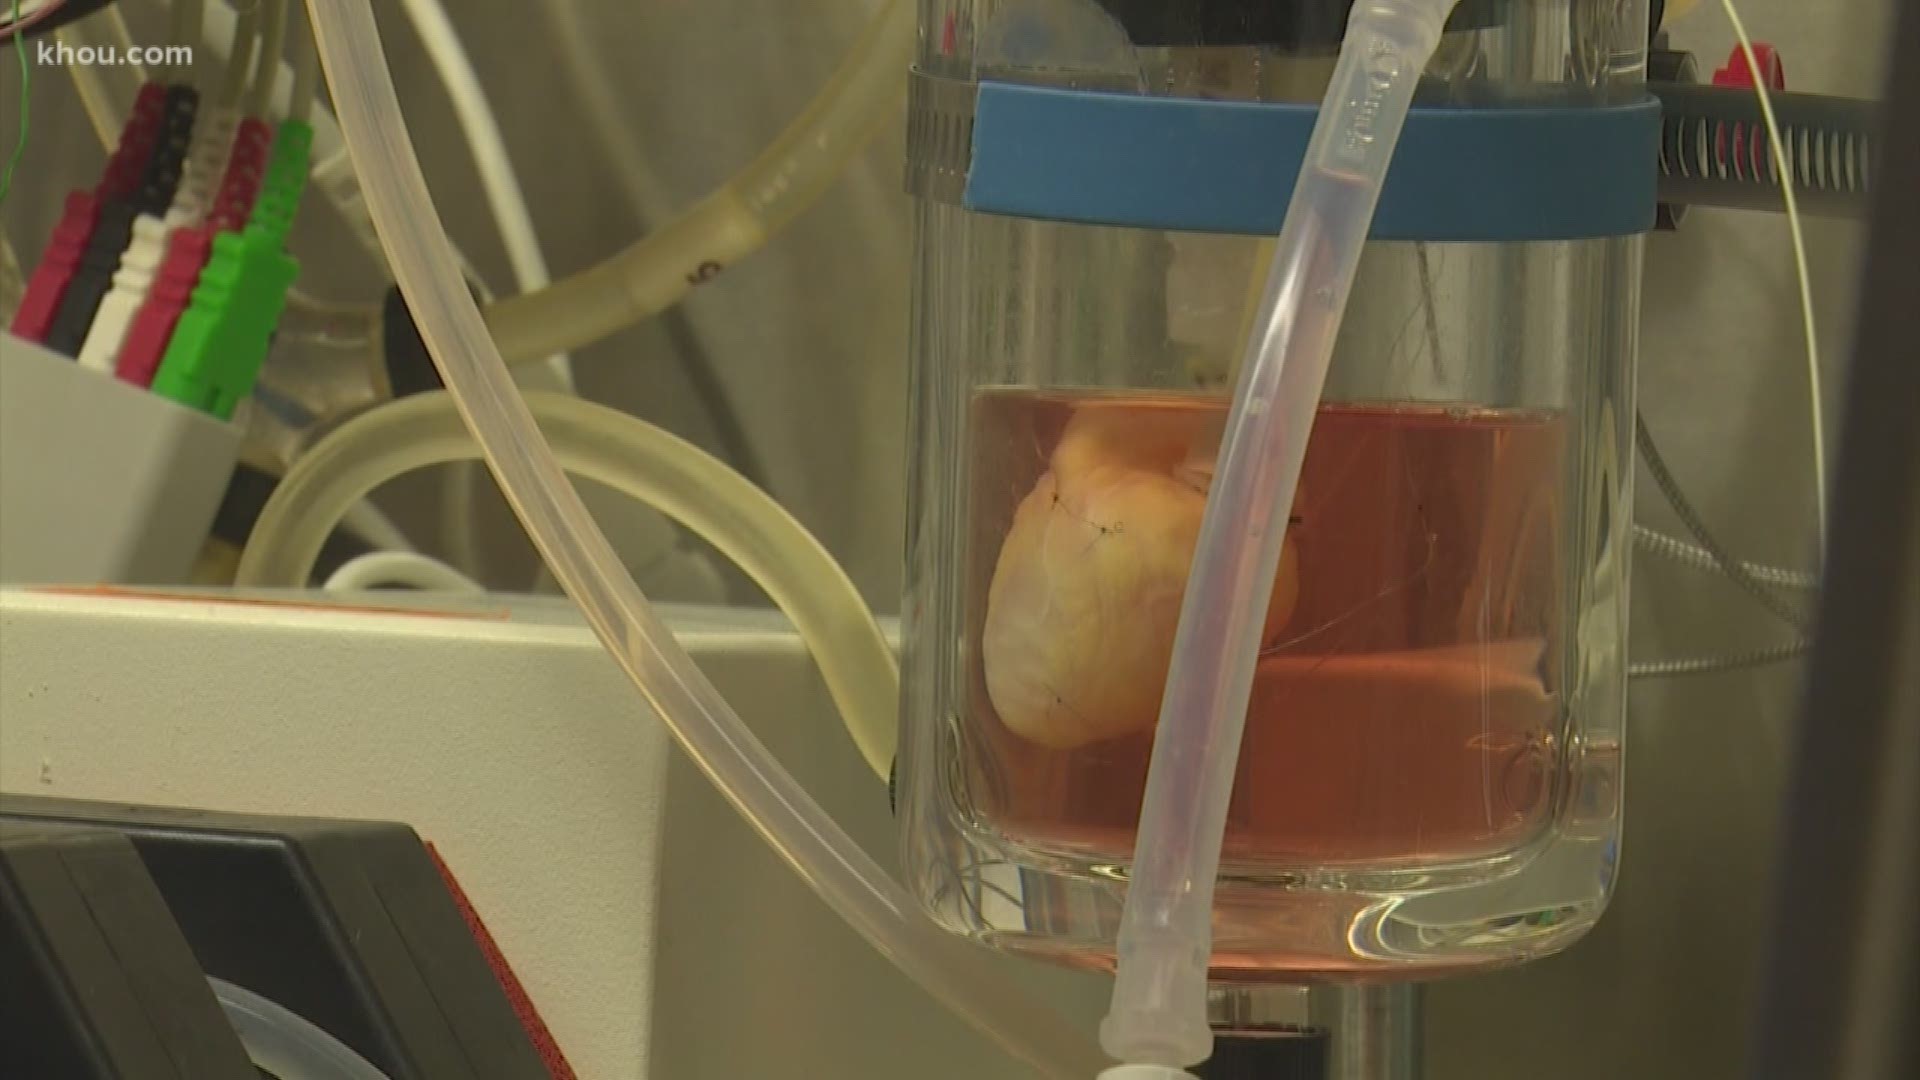 The Texas Heart Institute has a team of people trying to build hearts needed for life-saving transplants.